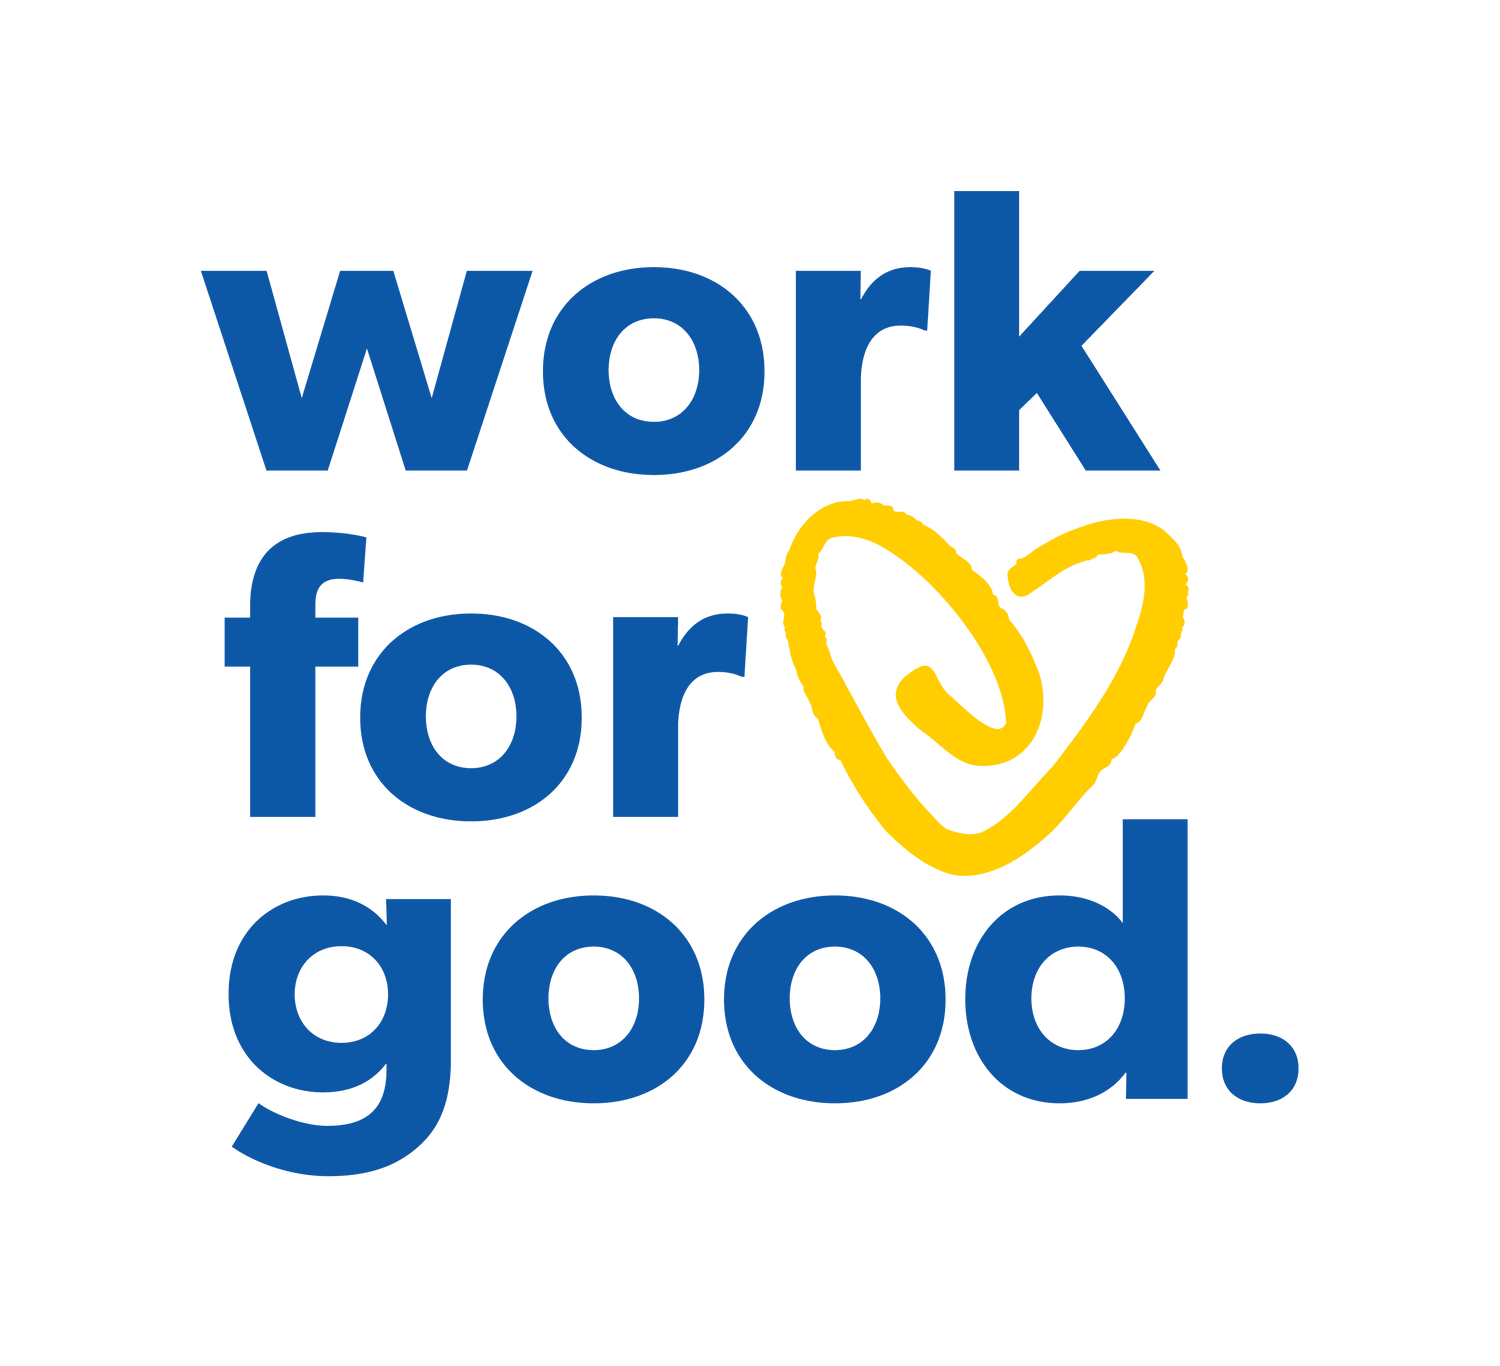 Graphic with text 'work for good' in blue letters and a stylized yellow heart, symbolizing HikeWare's commitment to donating 5% of sales to charity.